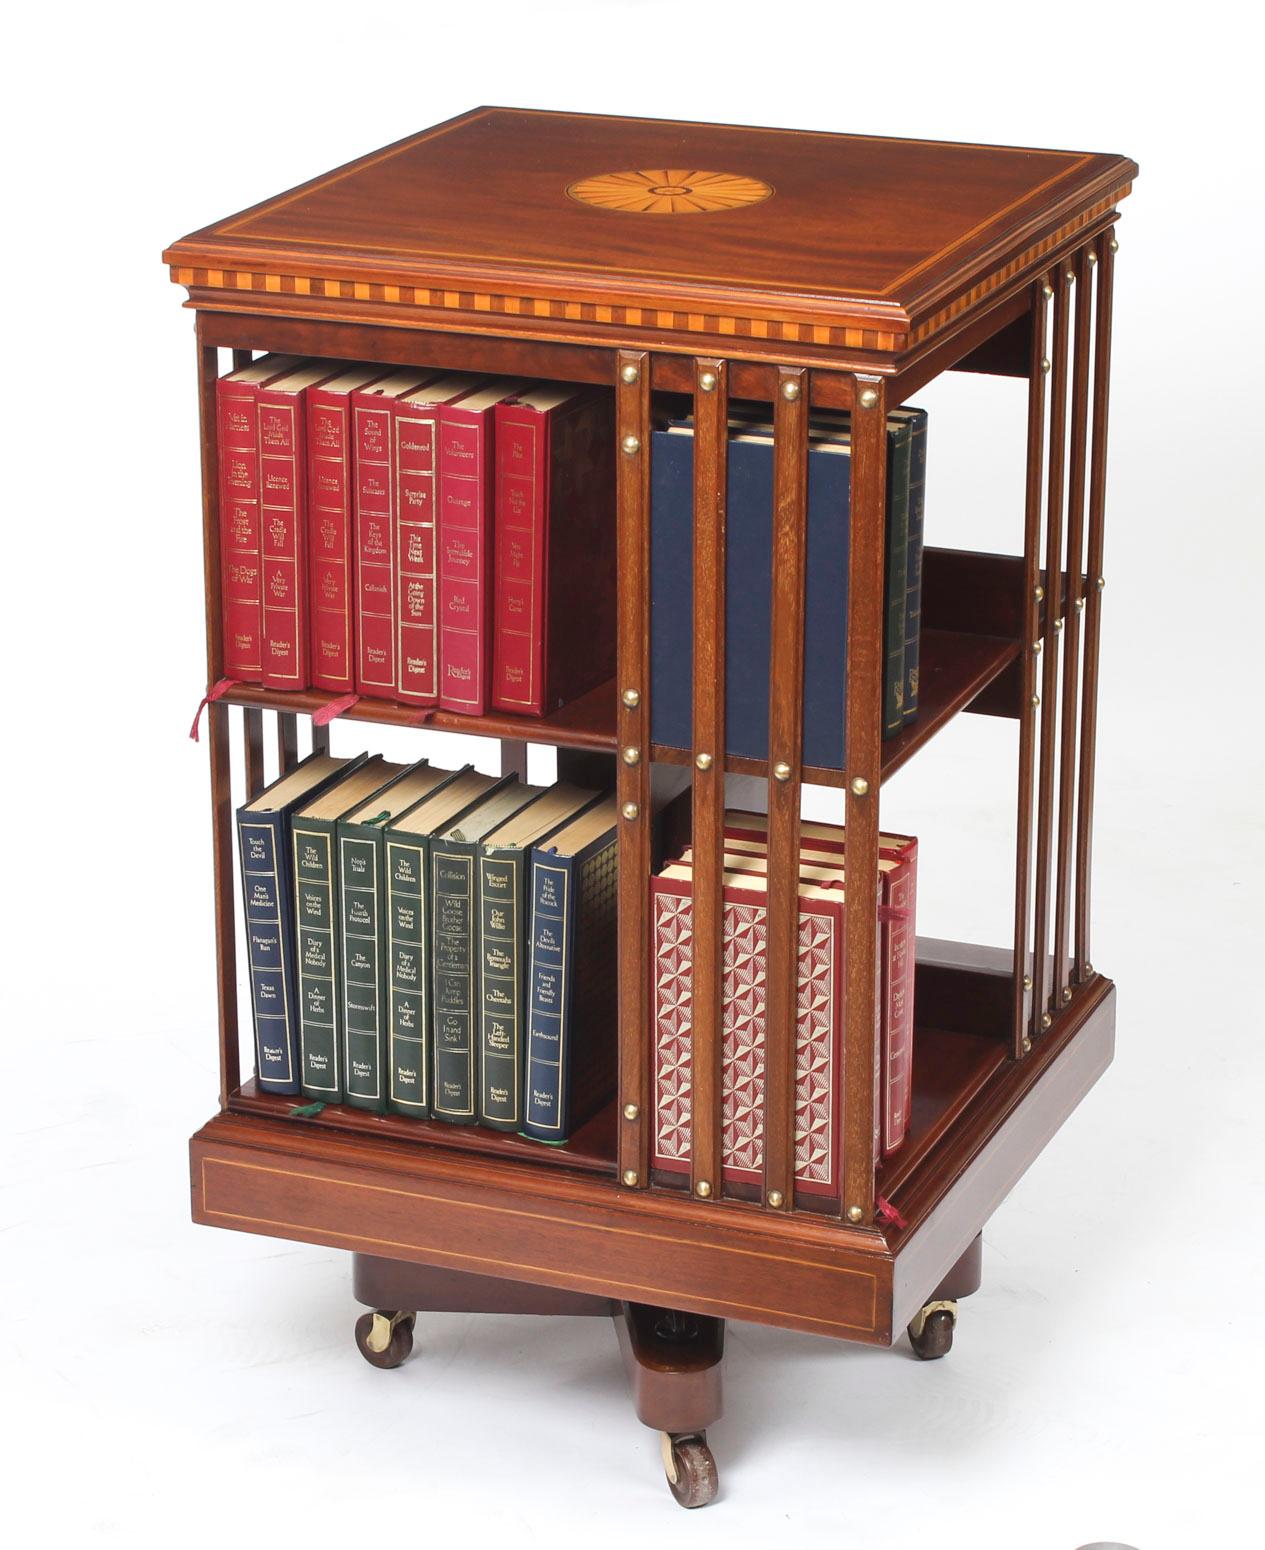 This an exquisite antique revolving bookcase by the renowned Victorian retailer and manufacturer Maple & Co., circa 1900.

It is made of mahogany , revolves on a solid cast iron base, has inlaid boxwood lines to the top and bottom, the top with